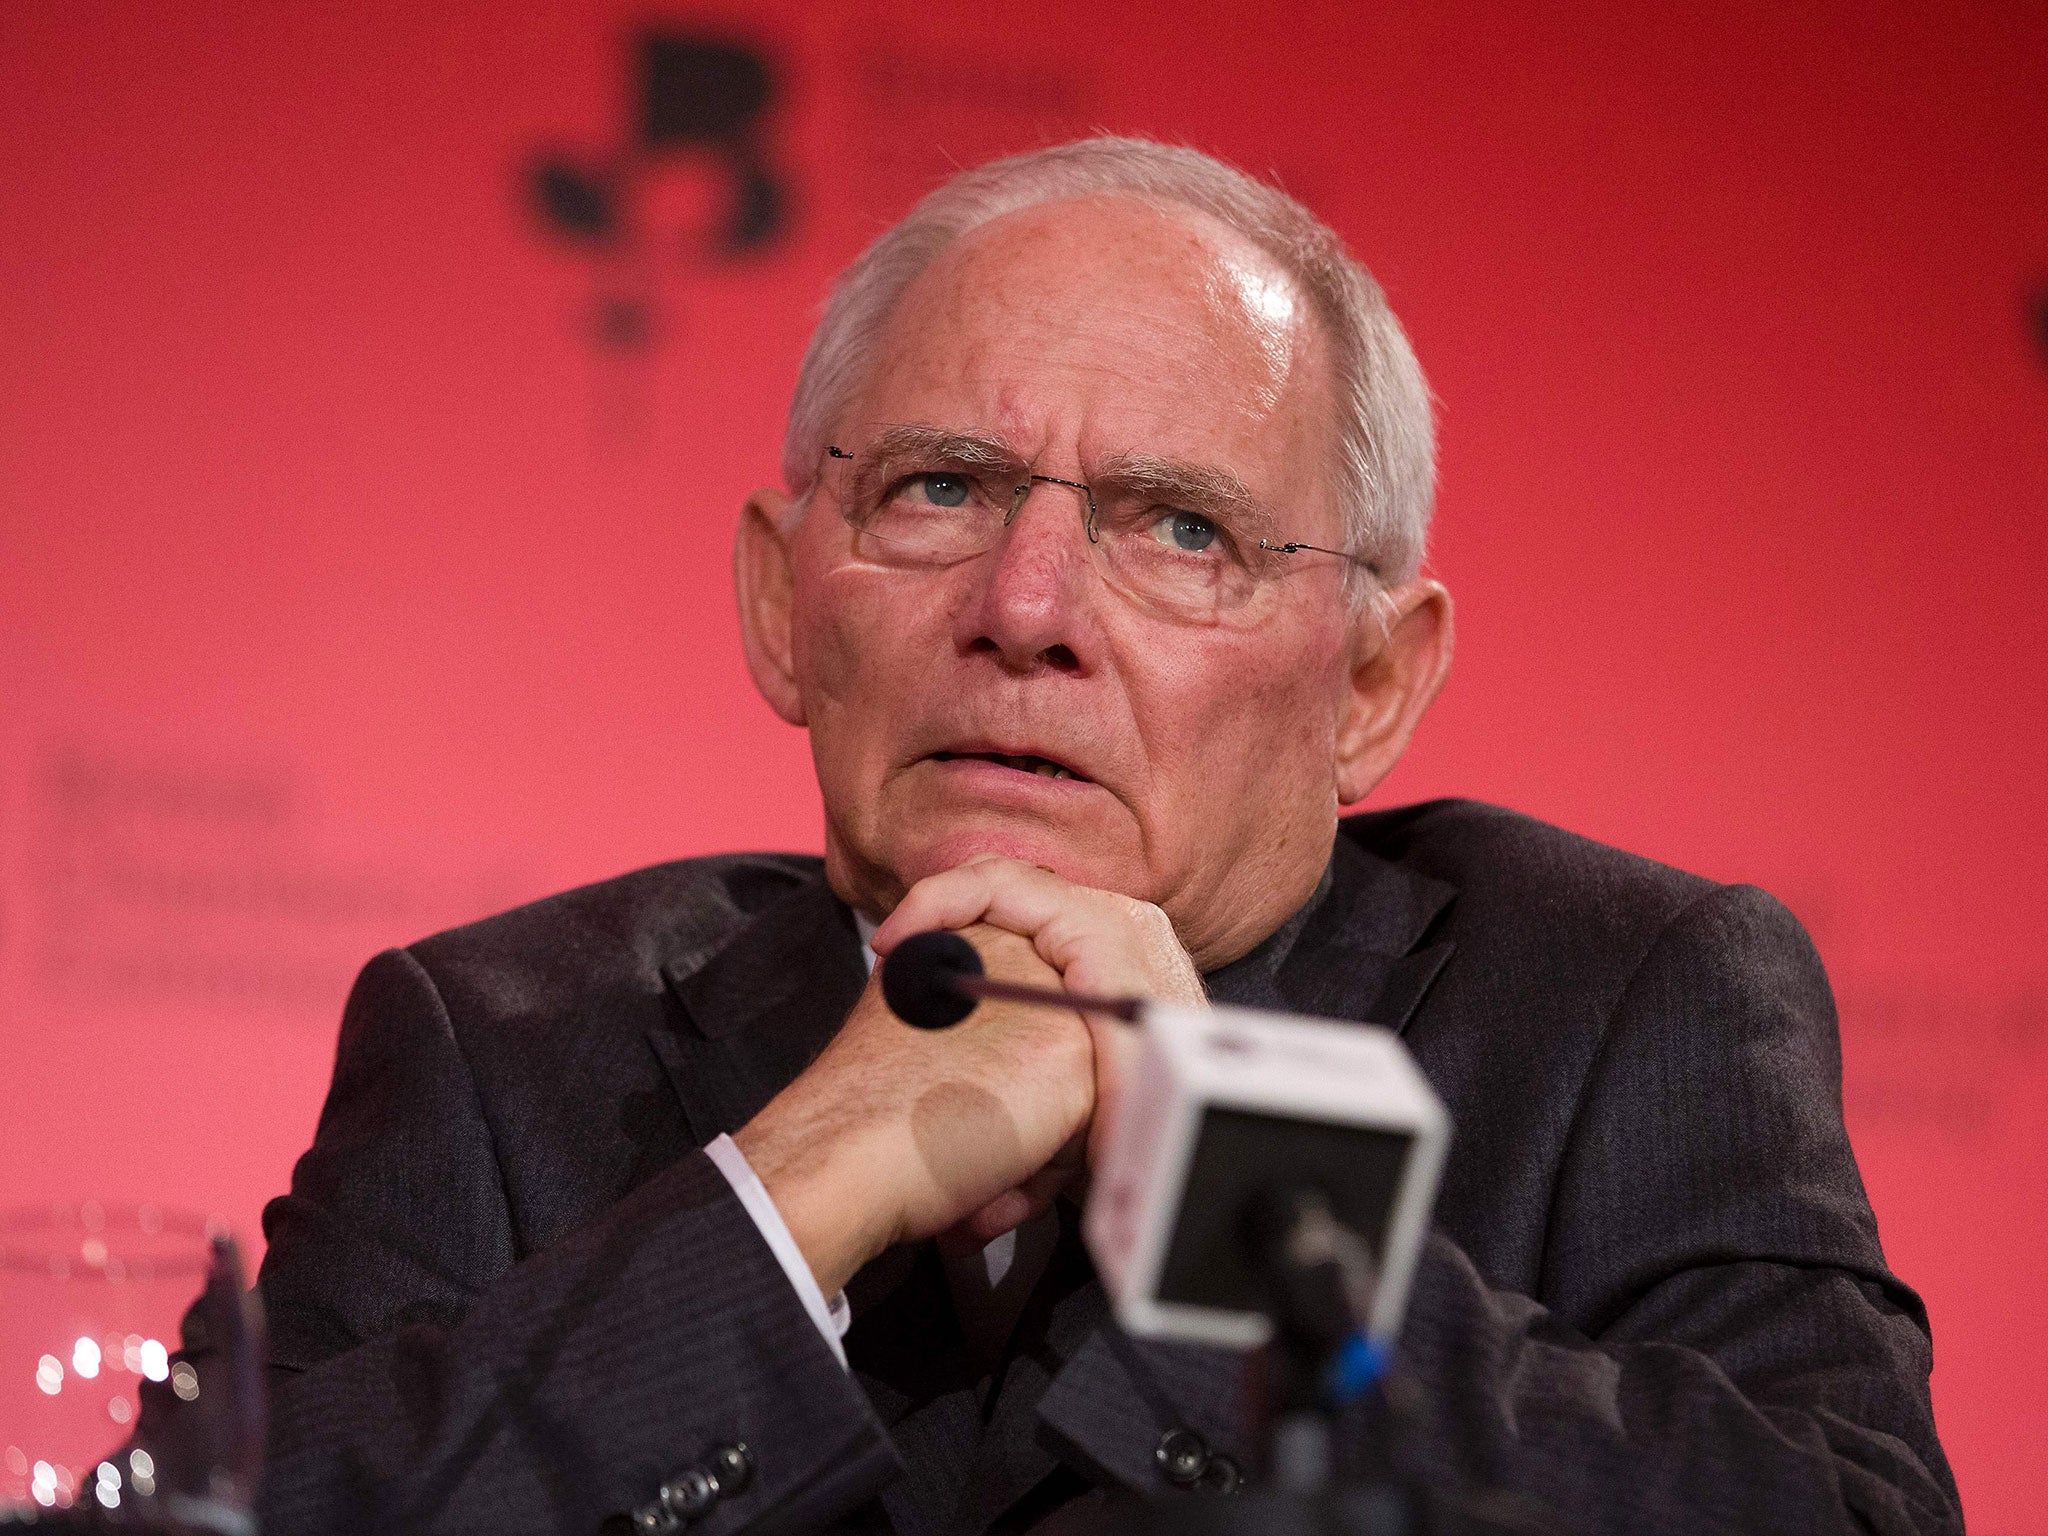 Wolfgang Schäuble has been a leading figure in German and European politics for decades